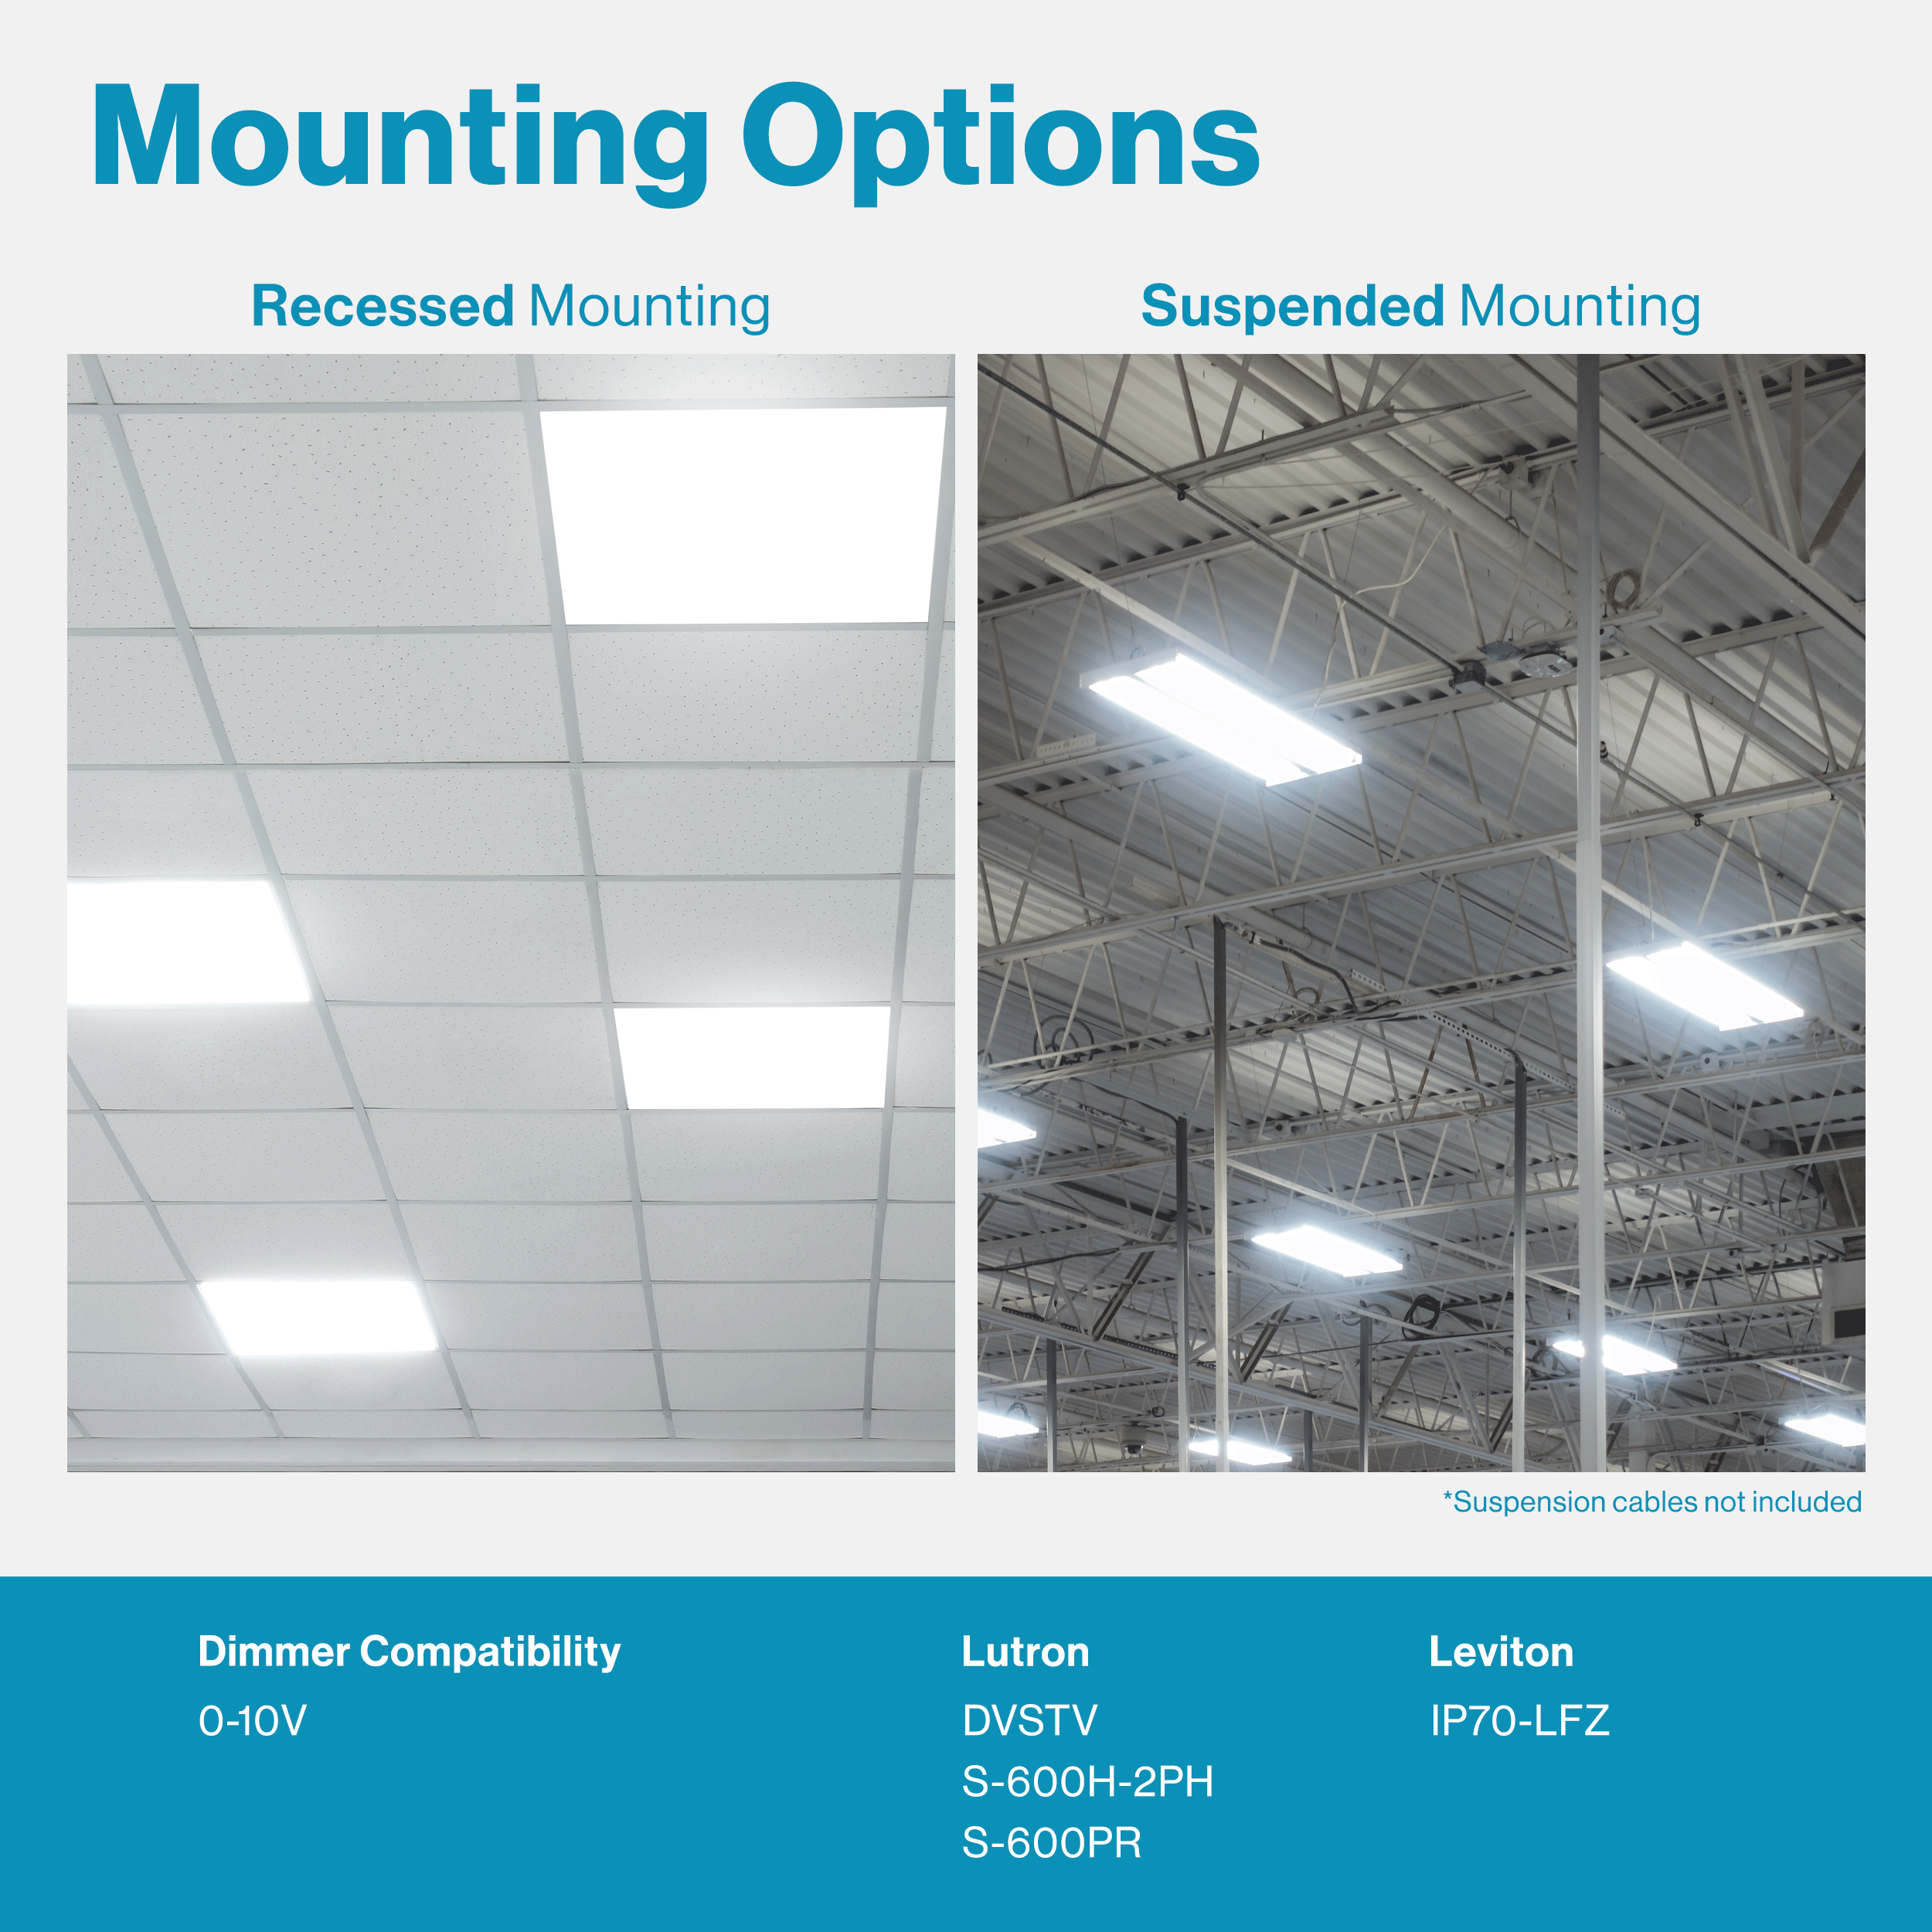 Use flexible mounting brackets to easily install this 0-10V dimmable 2x2 Sunco Lighting Ceiling Panel through recessed and suspended mounting options.